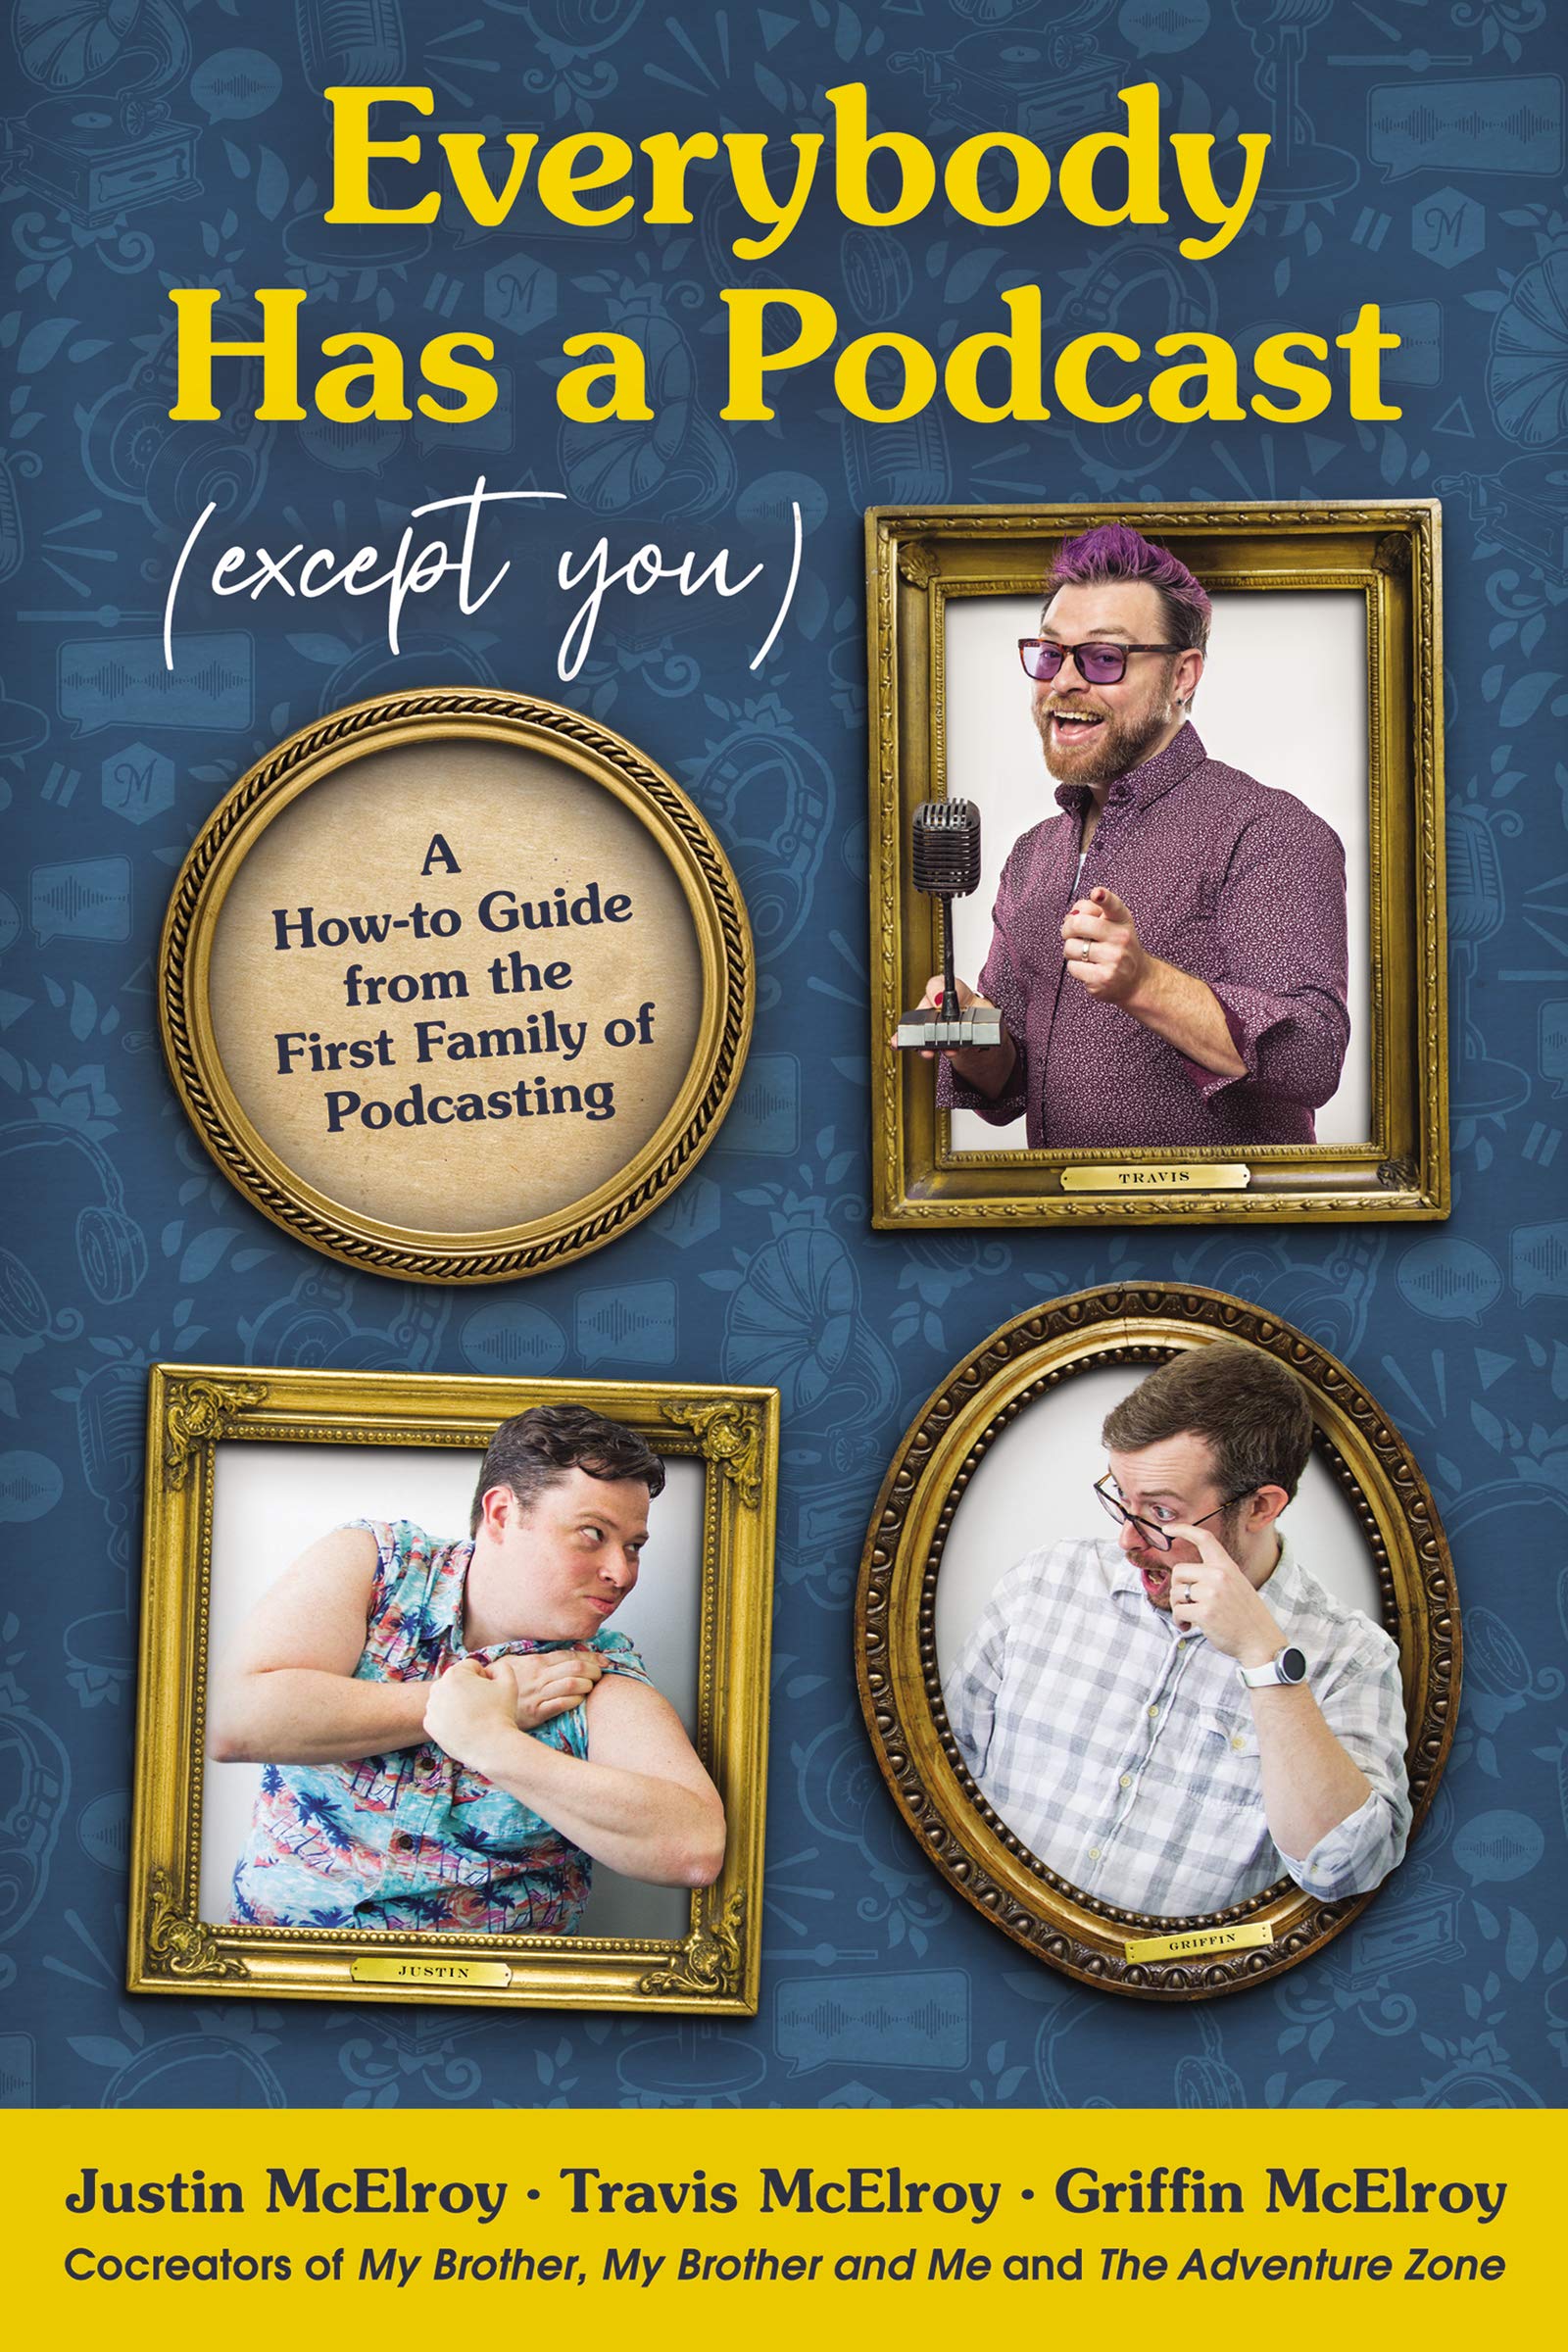 Couverture du livre Everybody Has a Podcast (Except You): A How-to Guide from the First Family of Podcasting